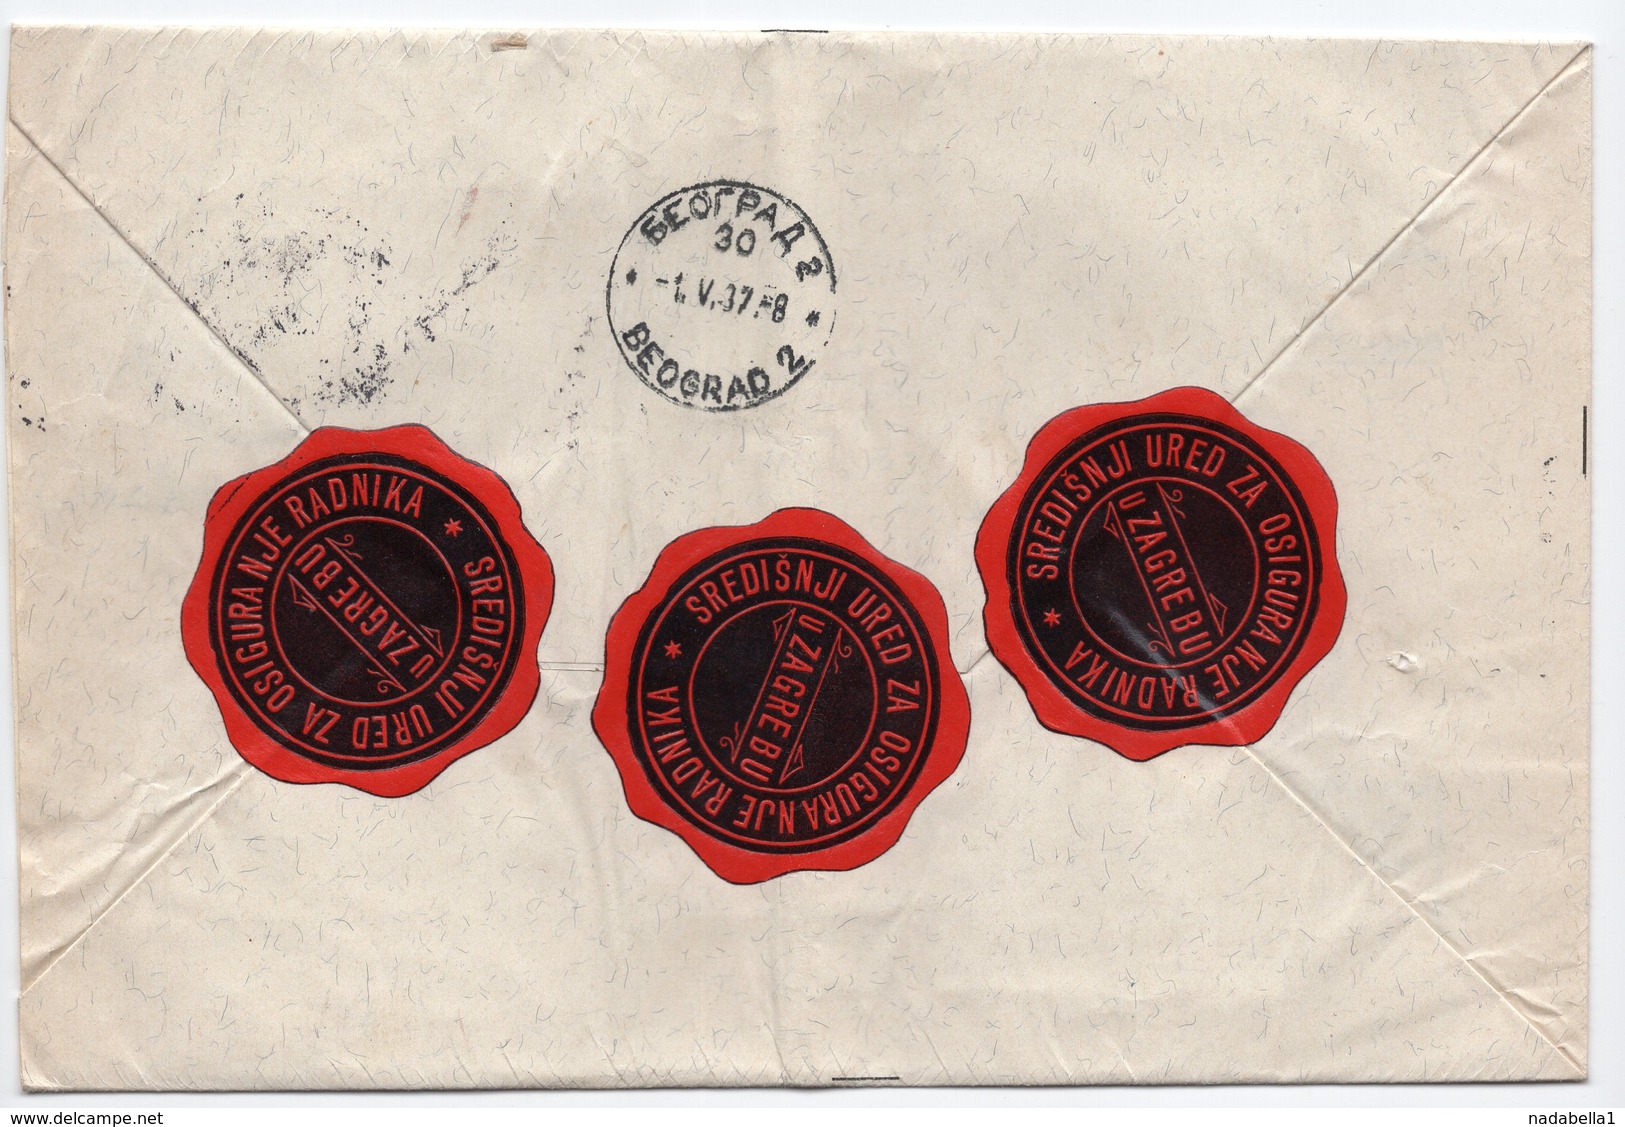 1937 YUGOSLAVIA, CROATIA, WORKERS INSURANCE  OFFICE ZAGREB, RECORDED, 3 POSTER STAMPS AT THE BACK - Covers & Documents